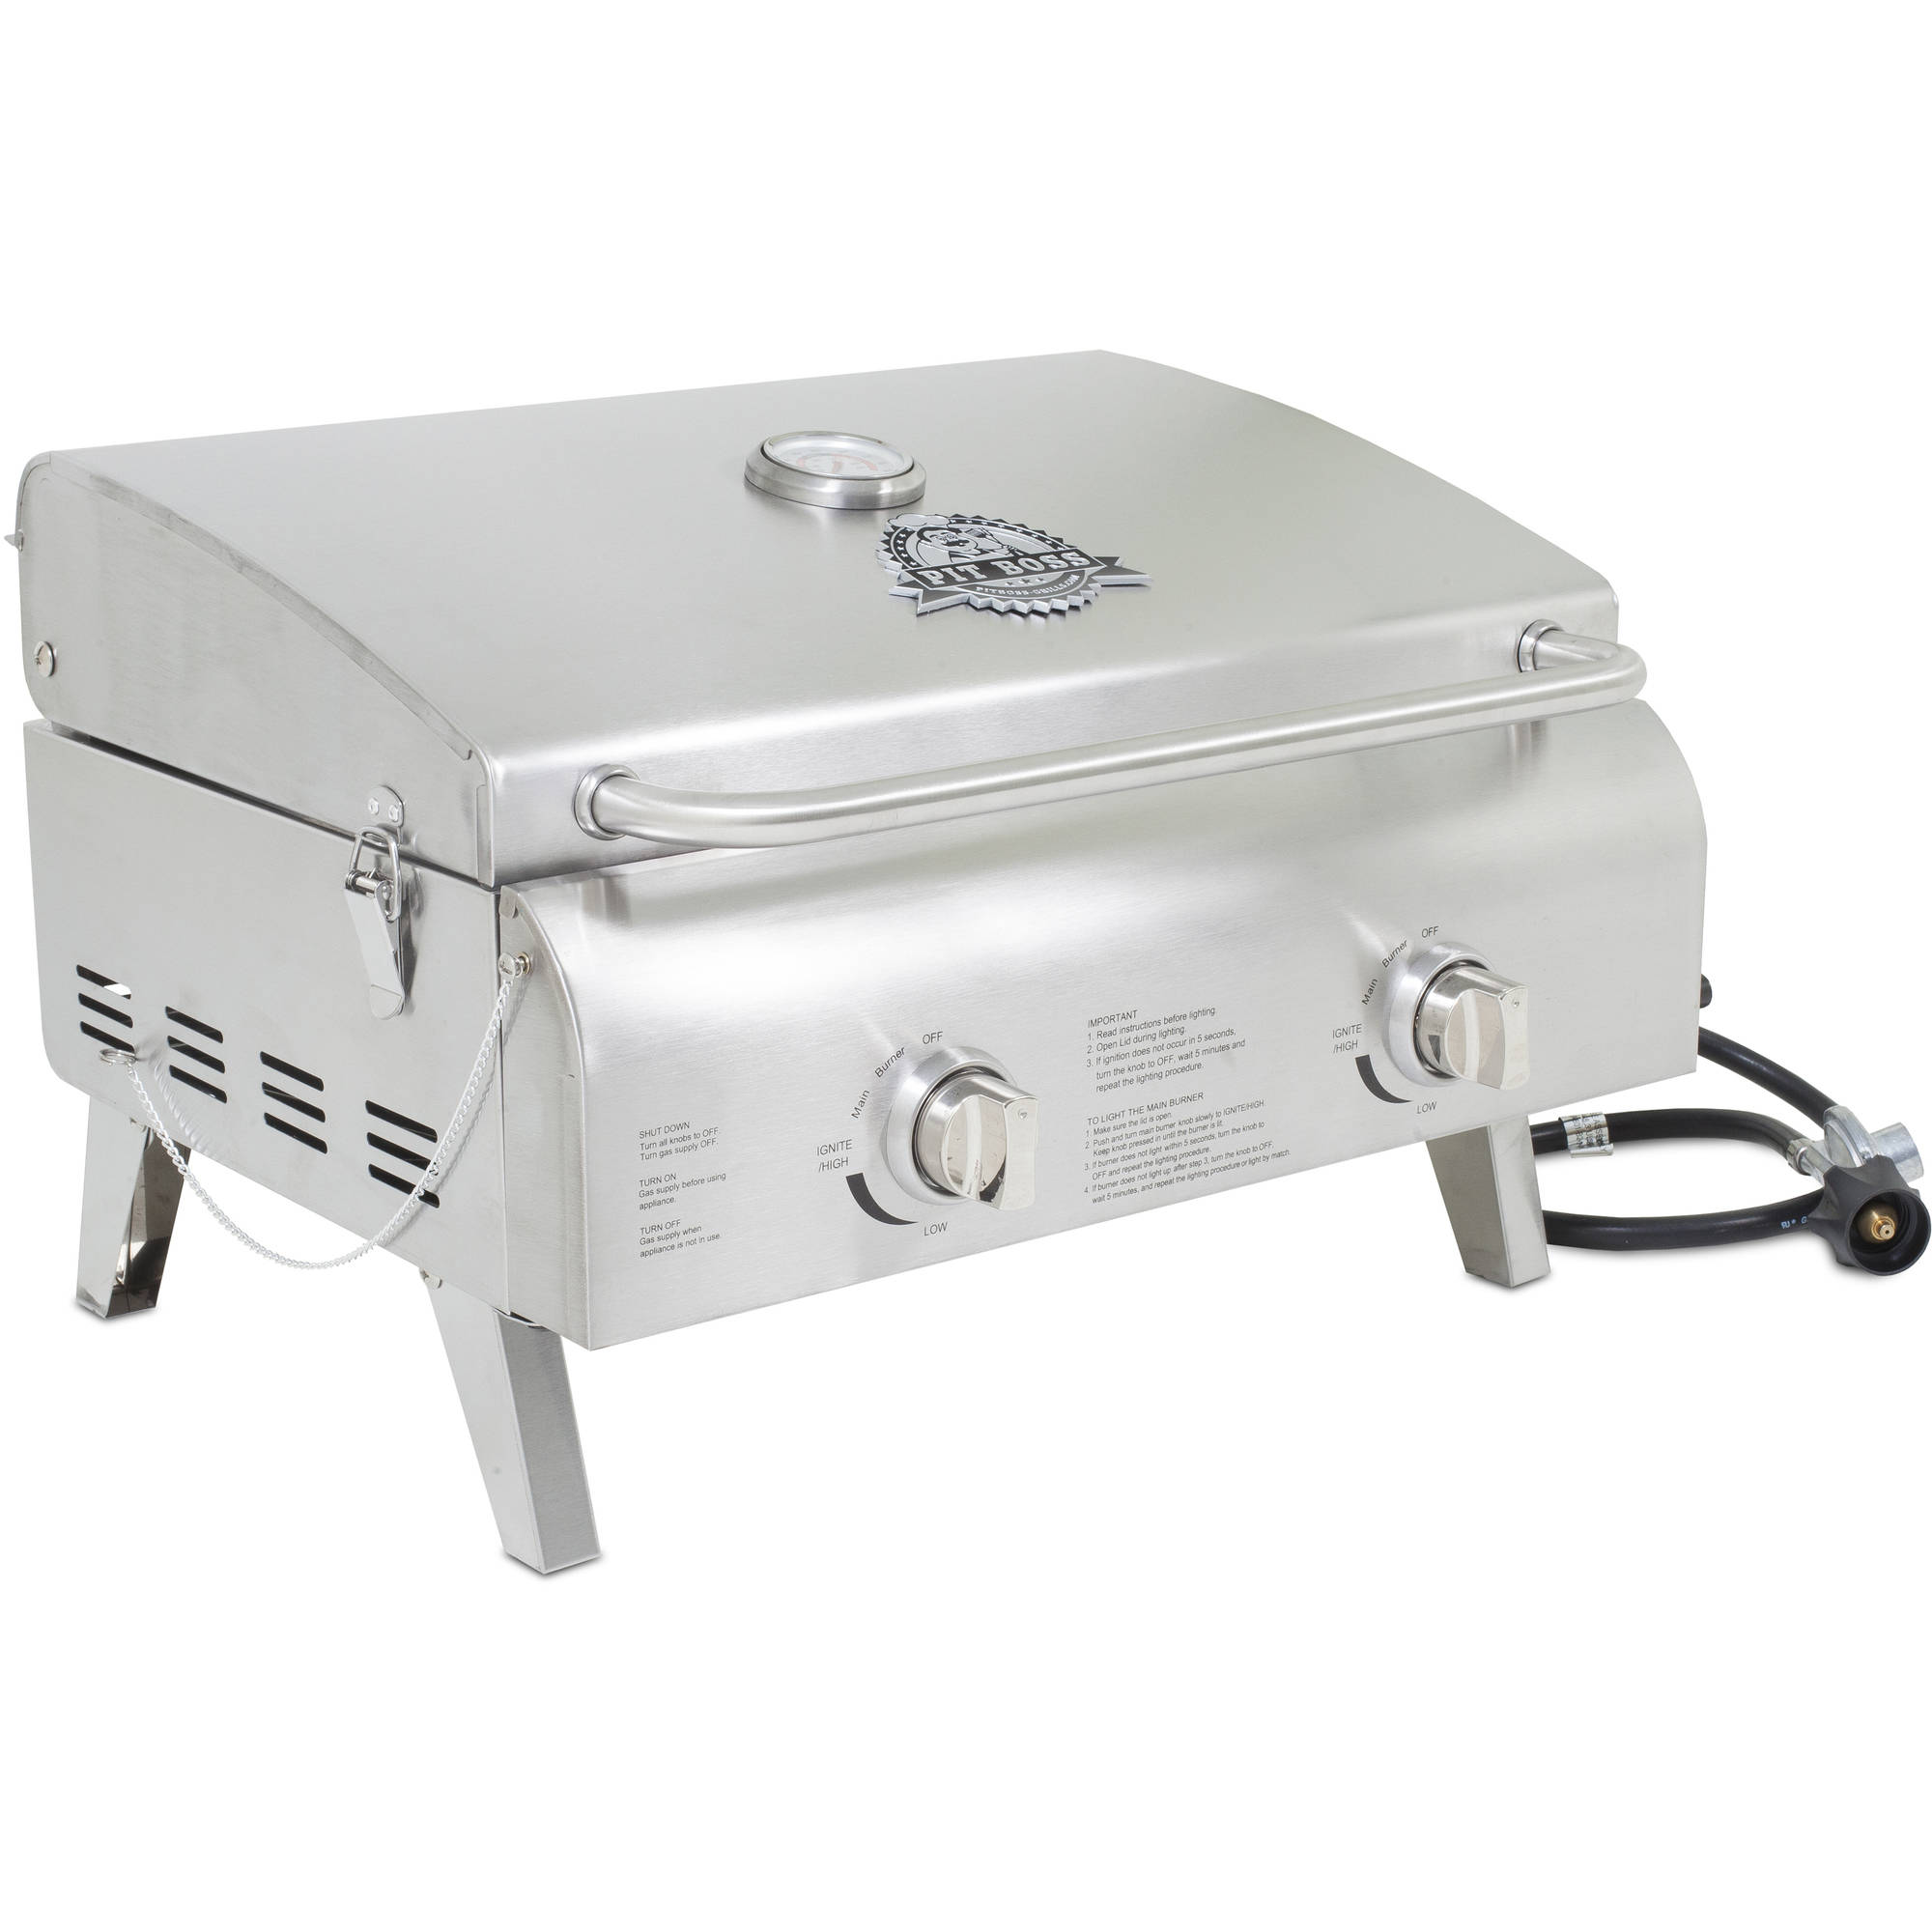 Pit Boss 2-Burner Portable Gas Grill, Stainless Steel - image 2 of 5